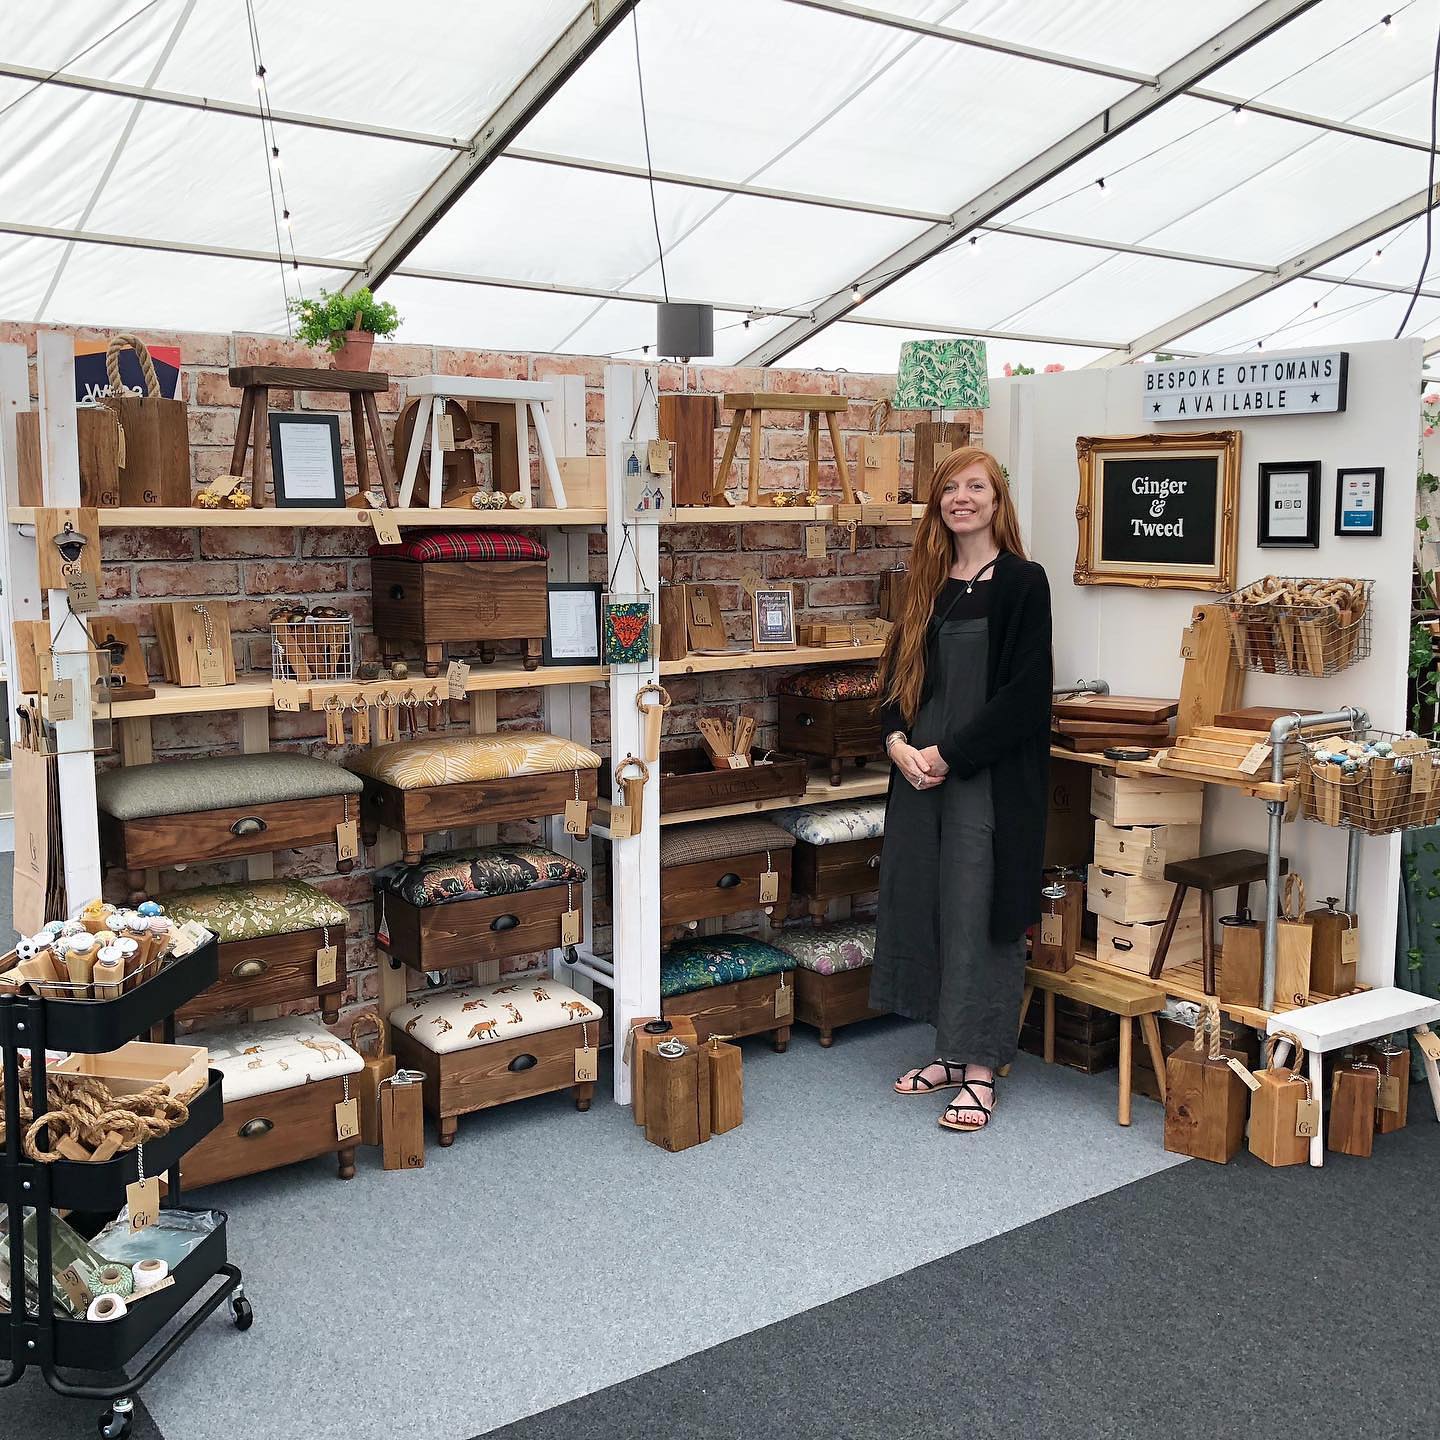 This time last year we were at the @thehandmadefestival We will really miss not seeing our fellow traders and meeting all the lovely people who visit the festival. If there is anything you see in our feed that you have my questions about or would like to order, feel free to get in touch or head to our website. Please help support the small businesses who cannot take part this year by visiting their feeds and websites. We’ve added some accounts below ..@charleyloudesigns @curlylulu_x @jazzymenagerie @clairehilldesigns @thefabricfox@clothandcandy@stitchkitscrafts@stitchsperation@gingerandtweed@stellen_uk@cat.and.magpie @stitching_me_softly @jane.fullman_bobbinandwire @wholepunching@prettysavagesoaps#handmadefestival2020 #handmadefestival #handcrafted #homewares #bushypark #hamptoncourt #craft #community #shopsmall